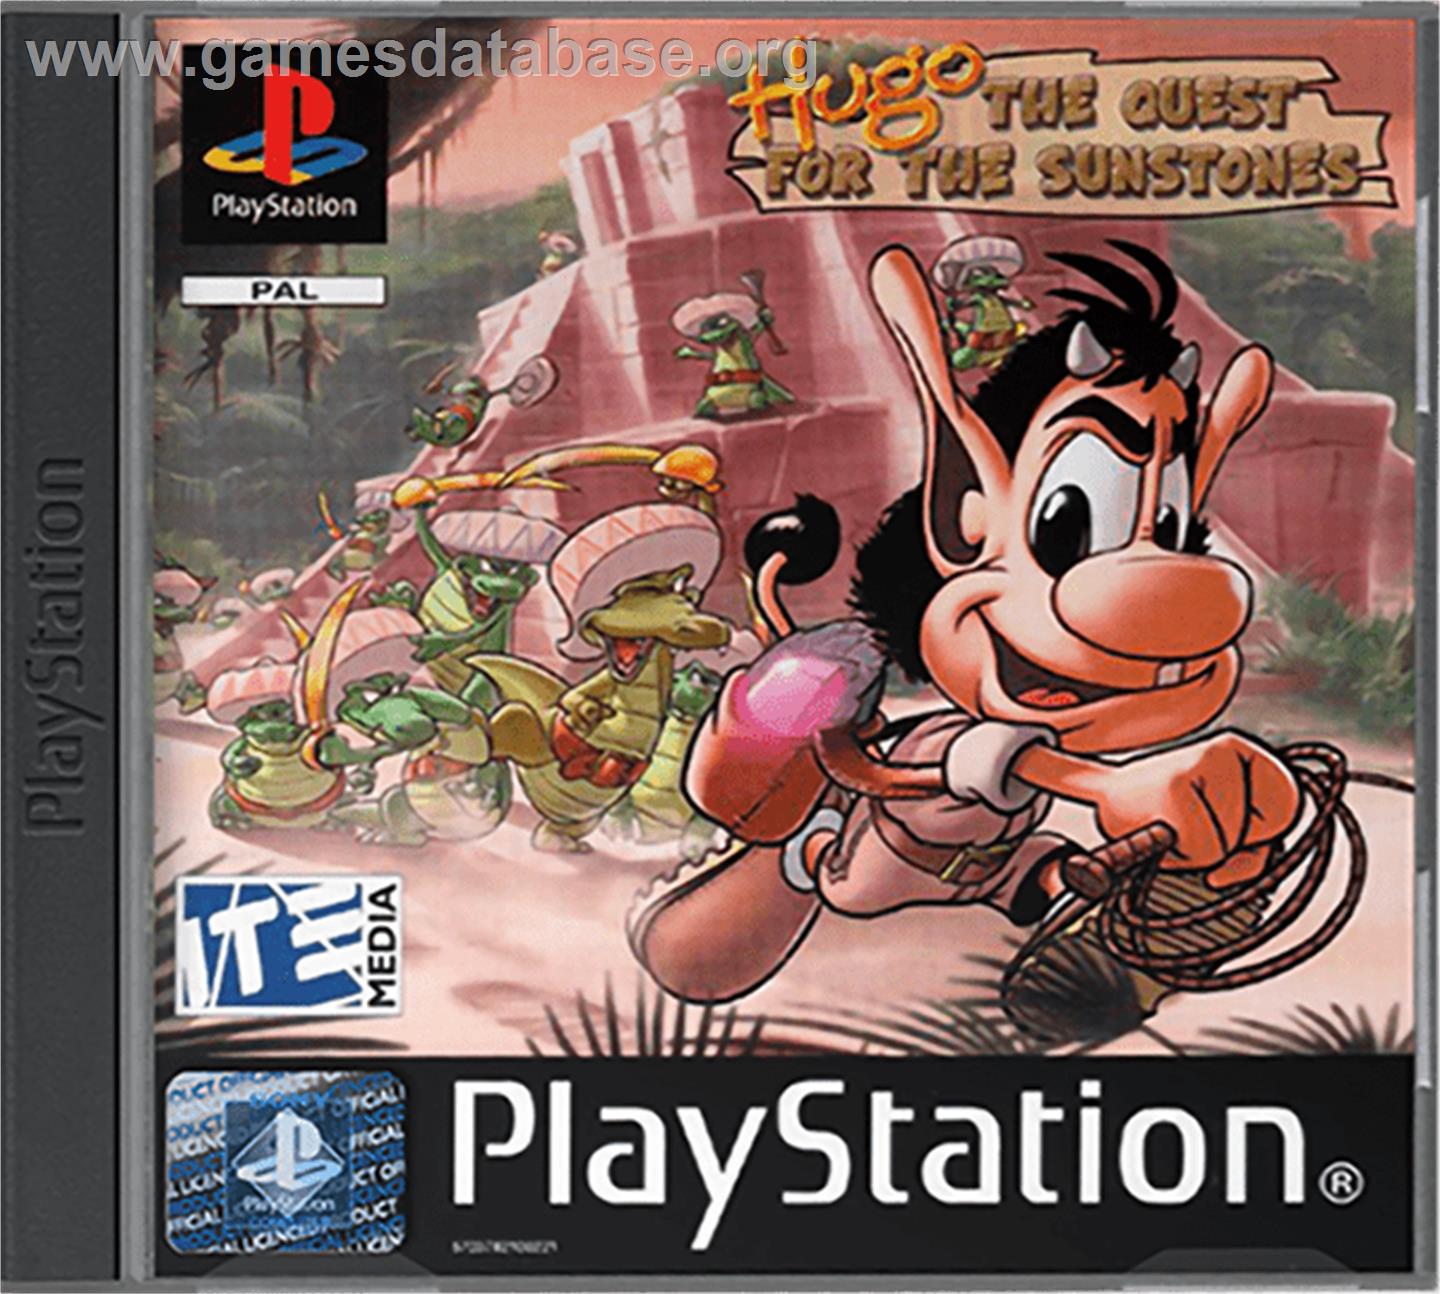 Hugo: The Quest for the Sunstones - Sony Playstation - Artwork - Box